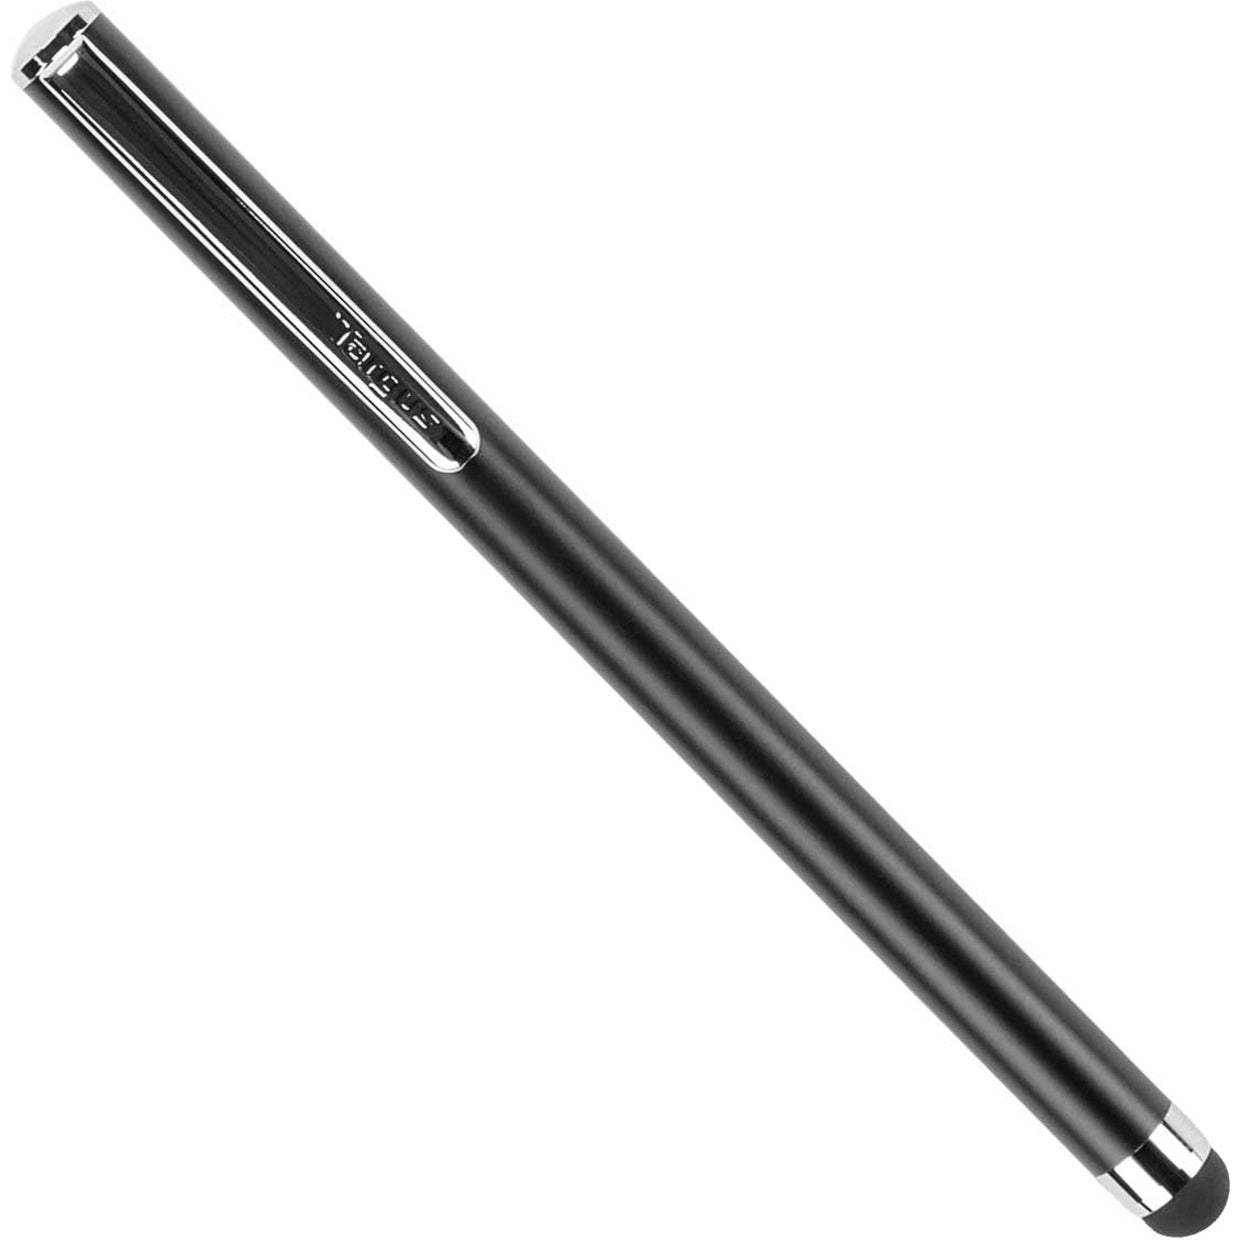 Targus AMM01TBUS Stylus for Tablets and Smartphones, Black